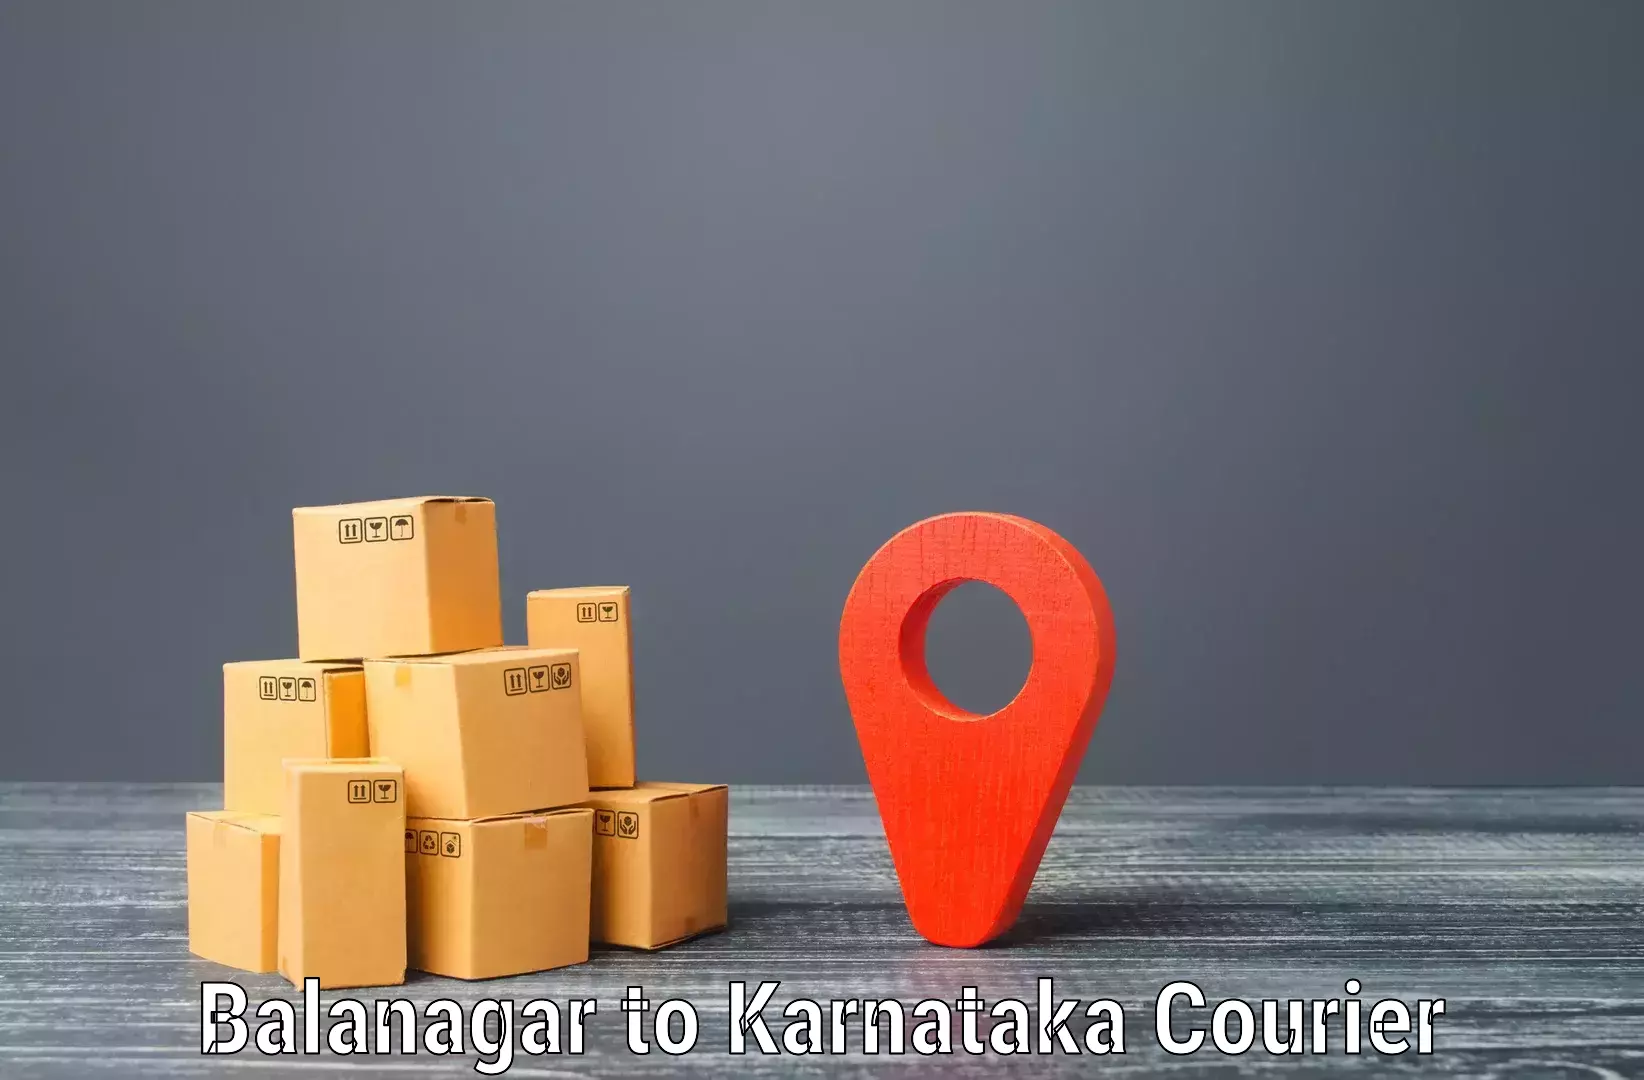 Nationwide delivery network Balanagar to Challakere